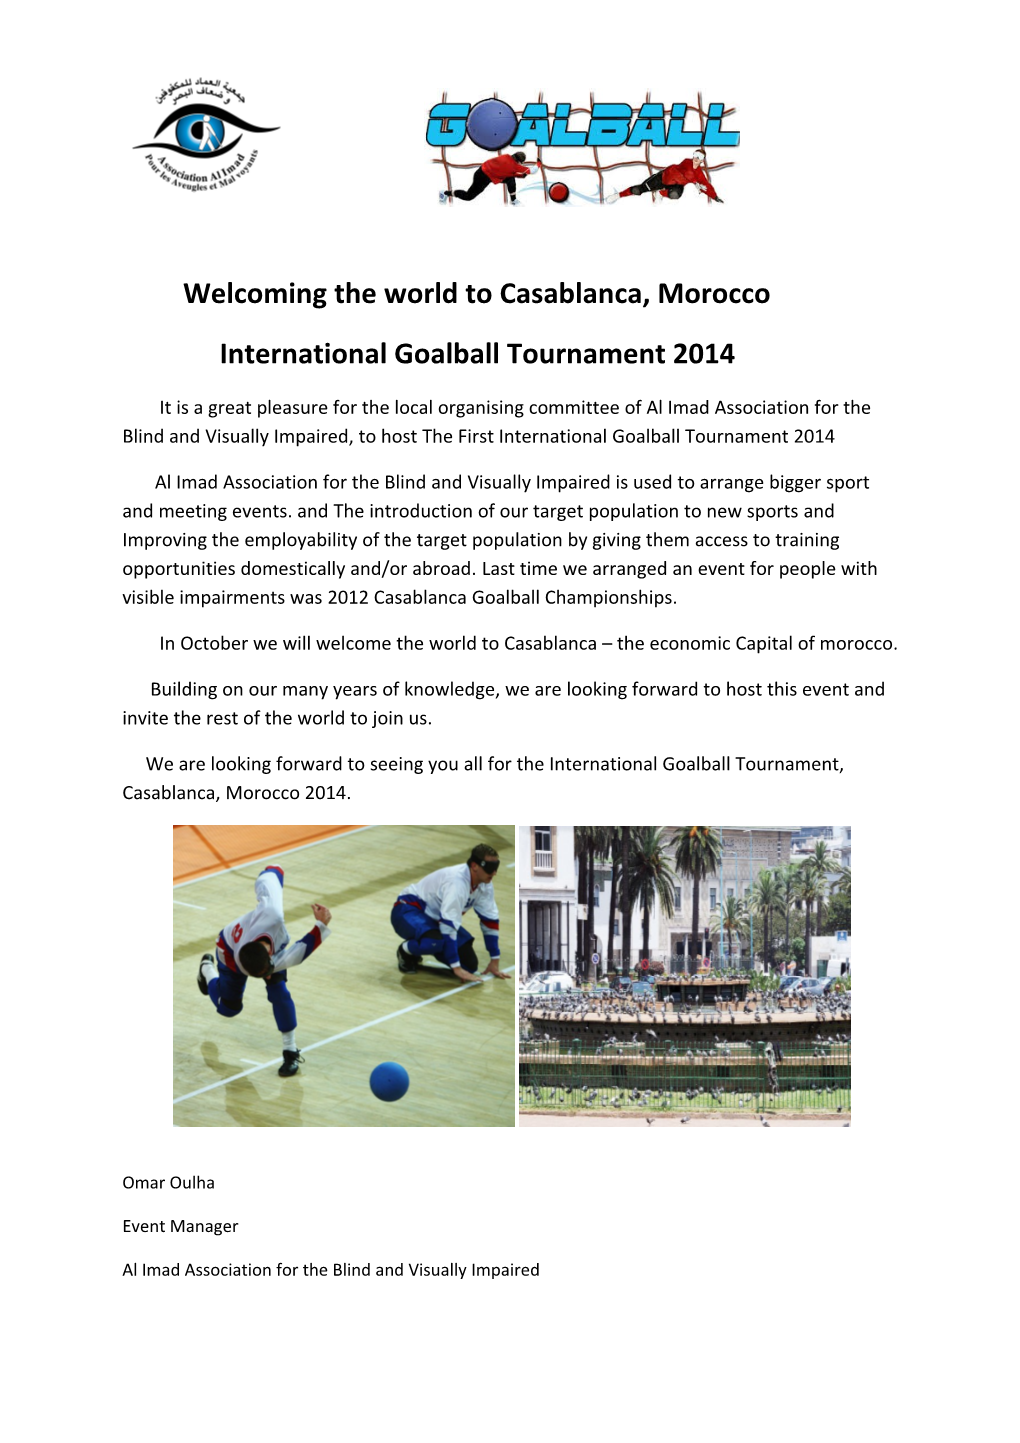 Welcoming the World to Casablanca, Morocco